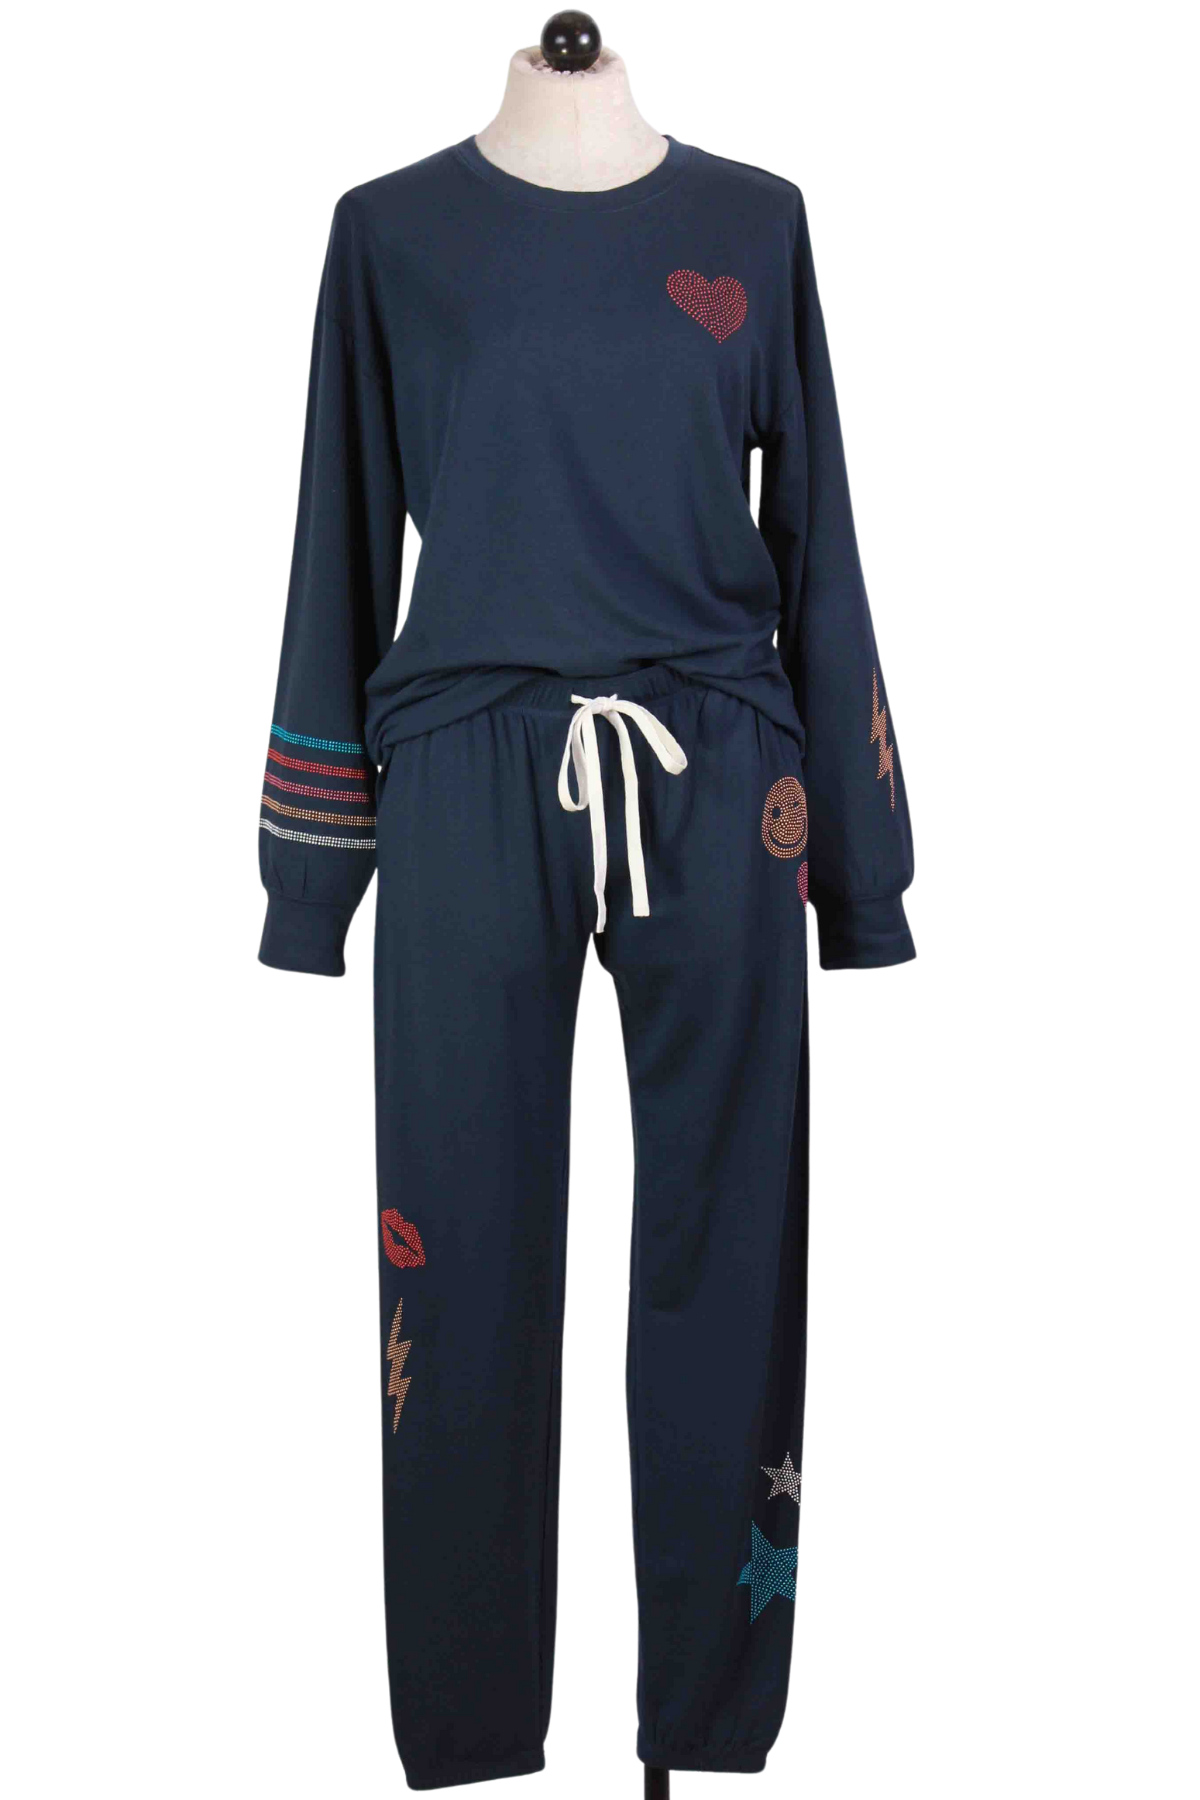 Navy Stoney Mind Pajama Pant by PJ Salvage paired with the matching Stoney Mind Top